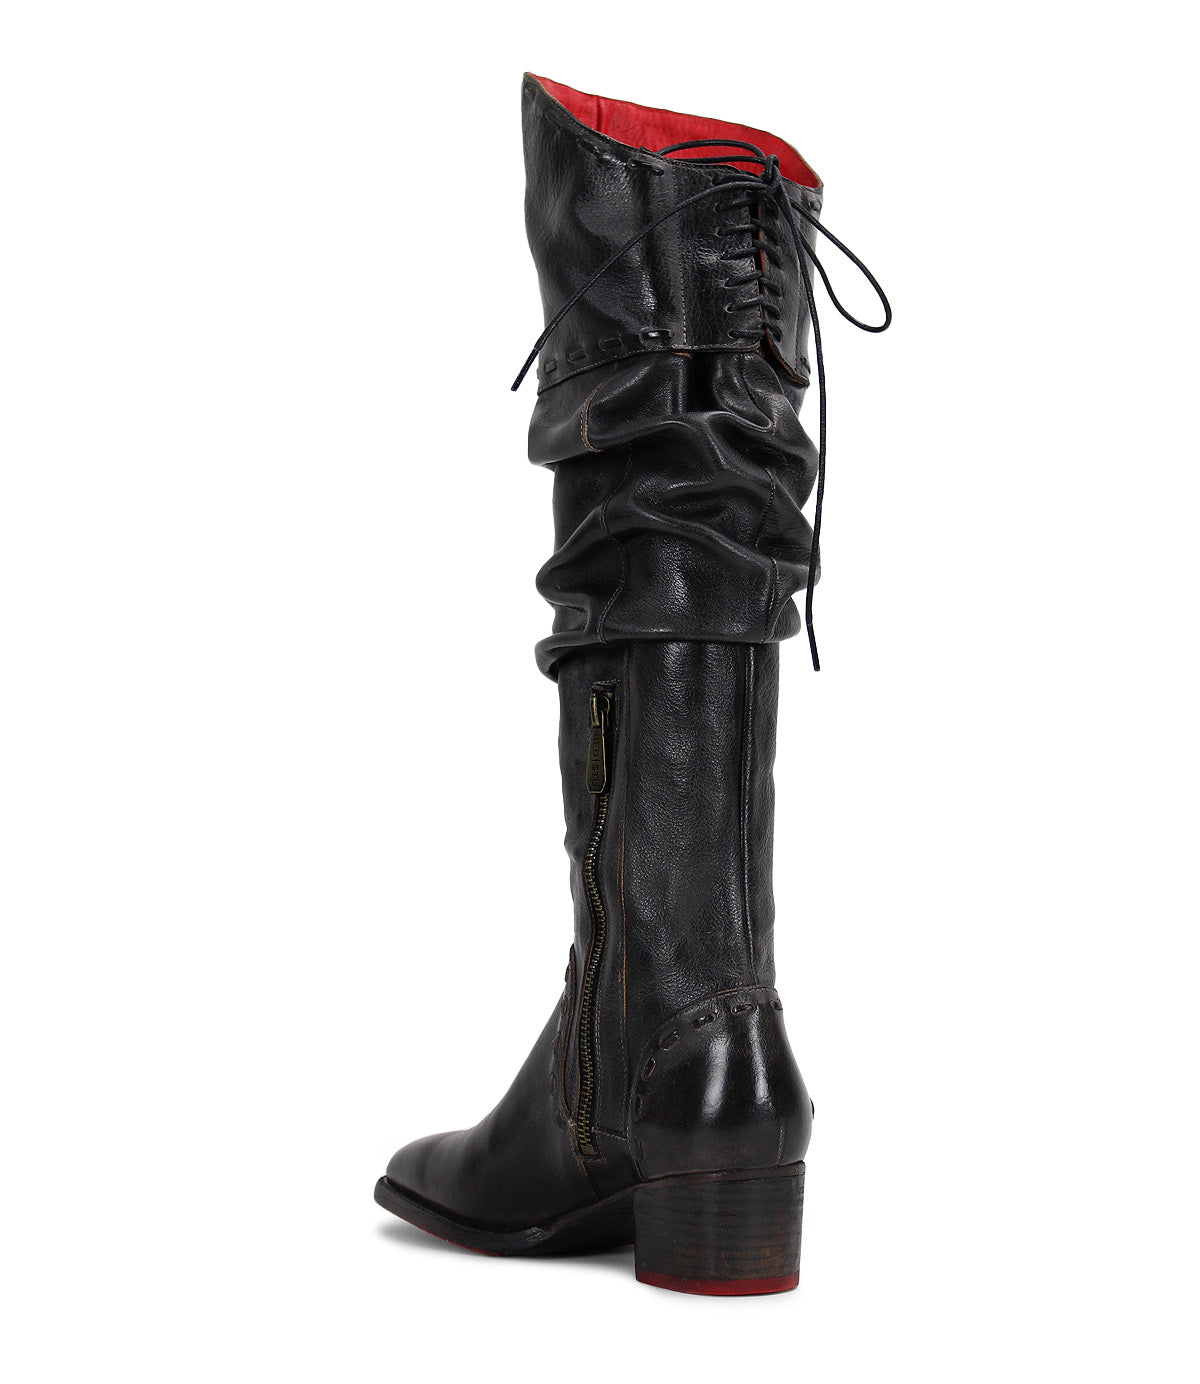 A woman's black Leilani over the knee boots with red detailing by Bed Stu.